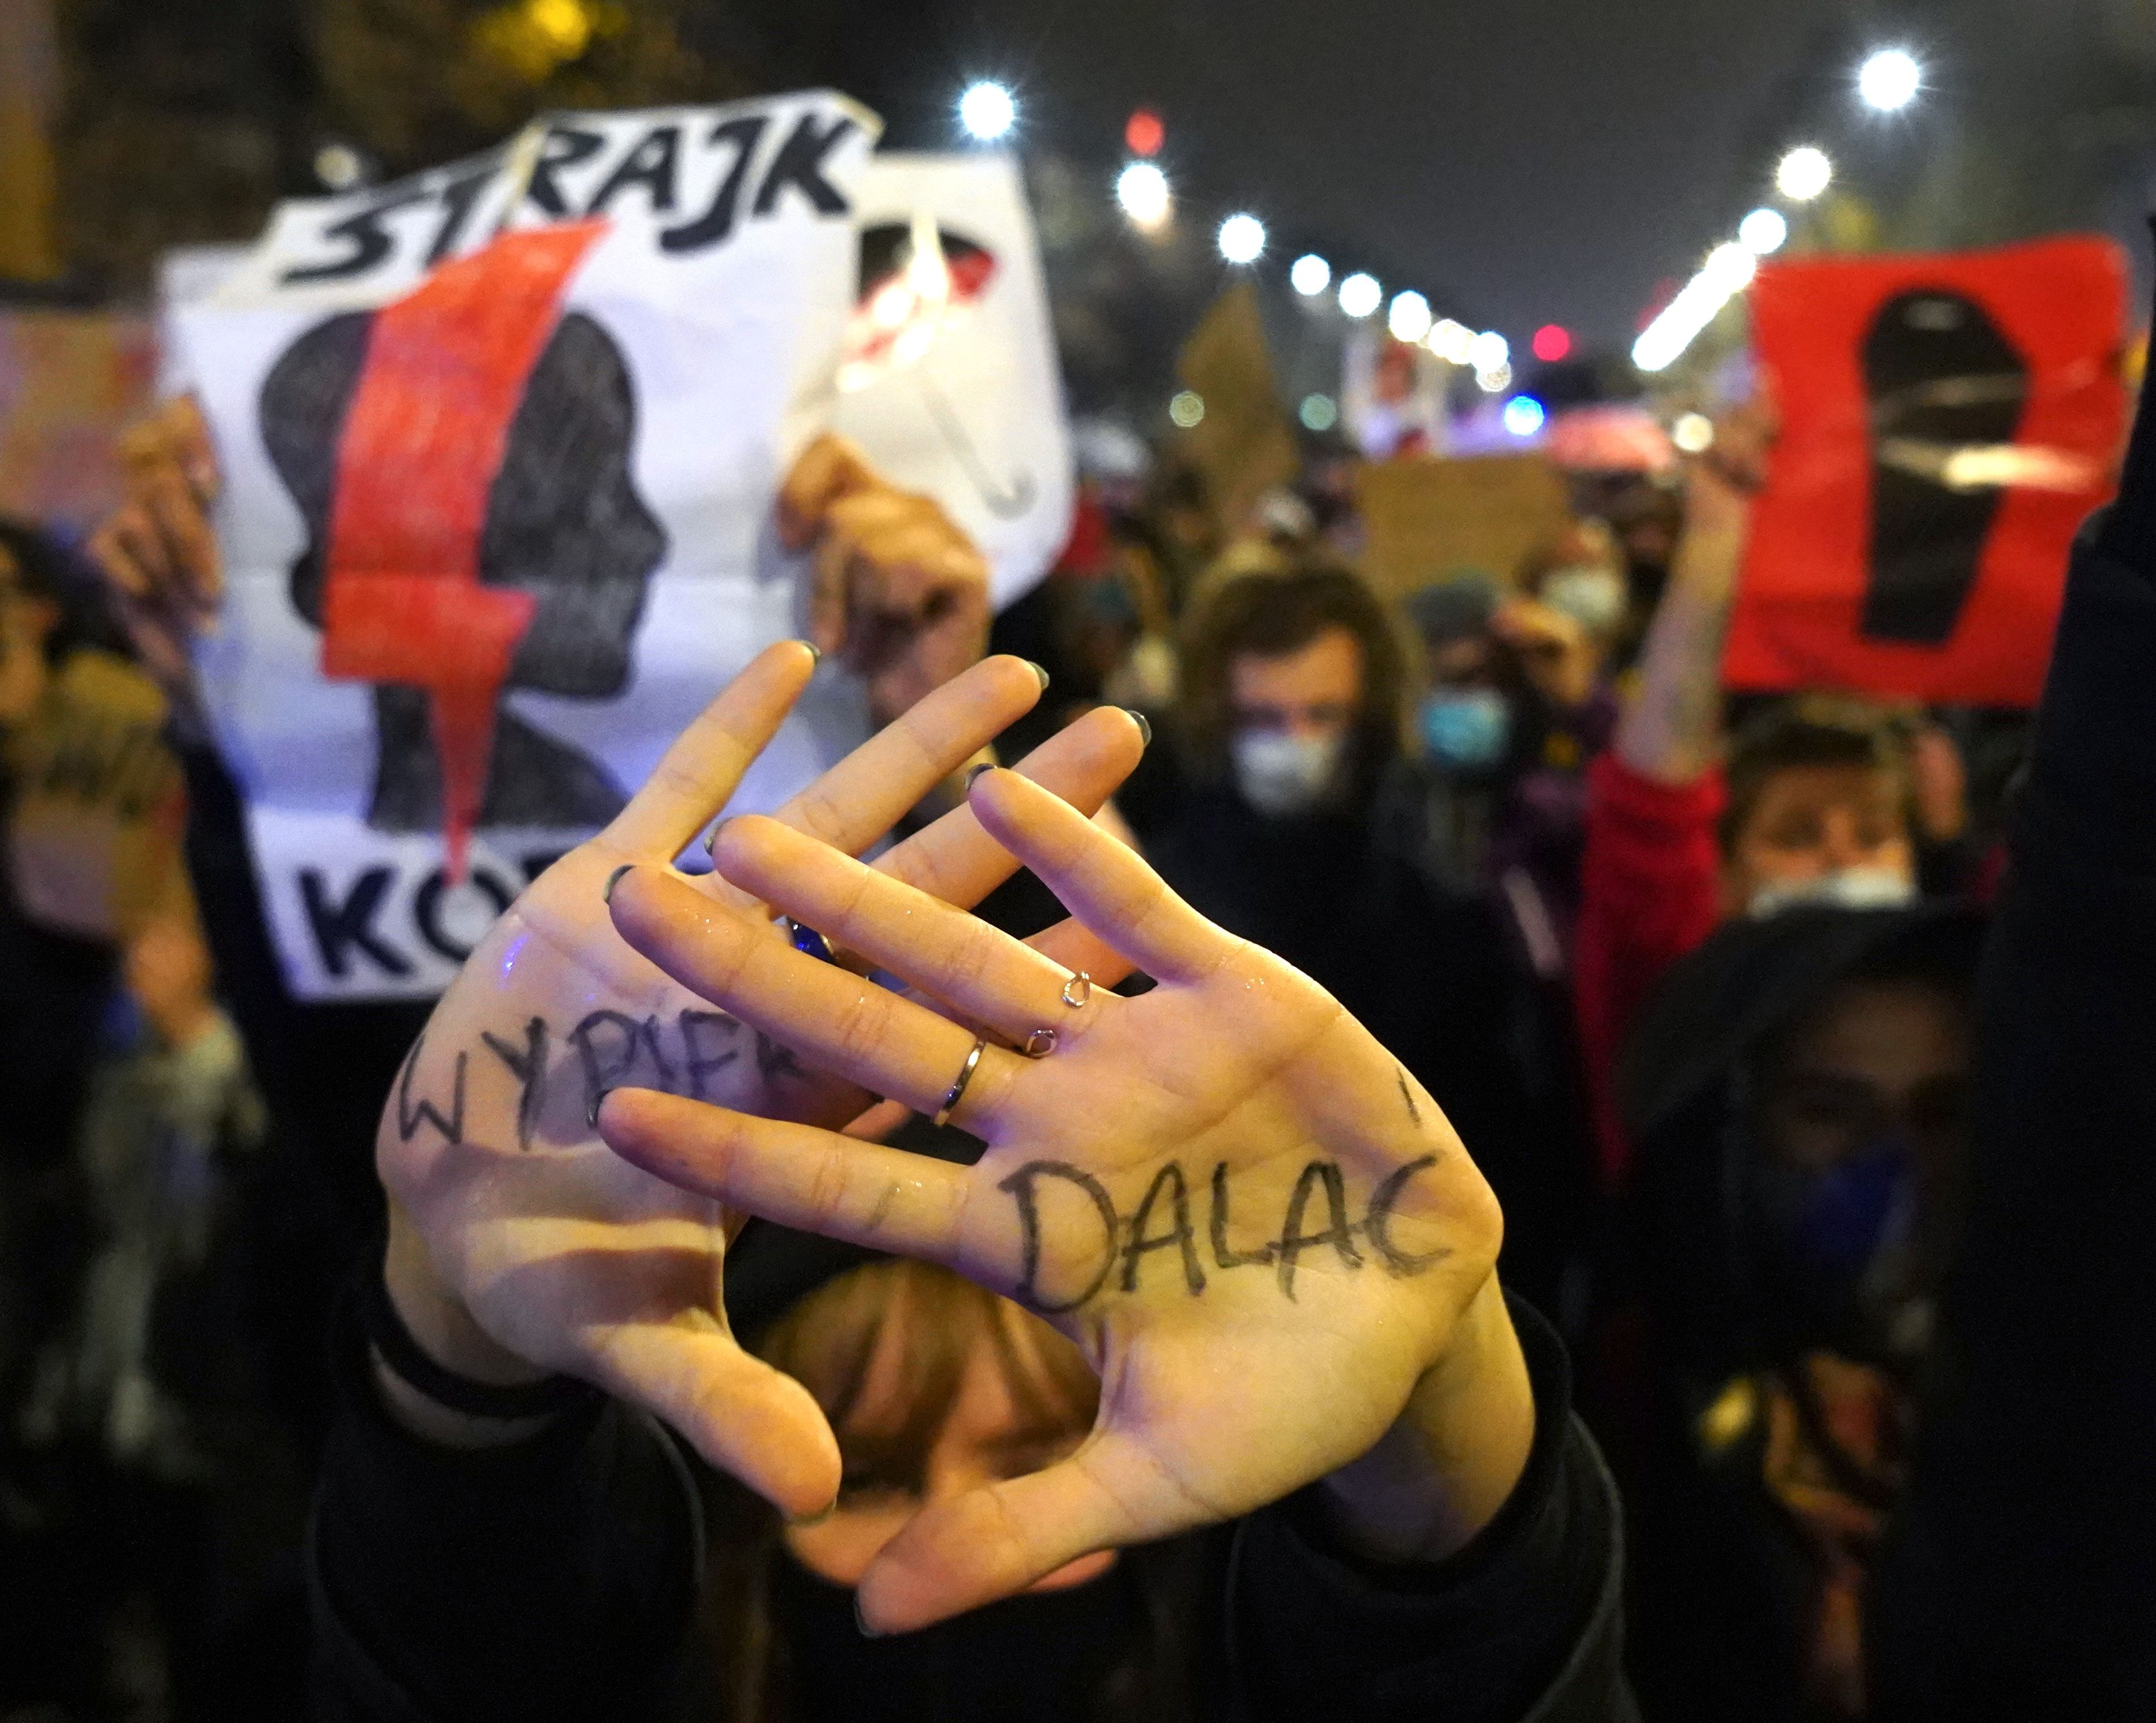 A protestor shows her hand written 'Get the fuck out of here' during a demonstration against a decision by the Constitutional Court on abortion law restriction, in Warsaw, Poland.